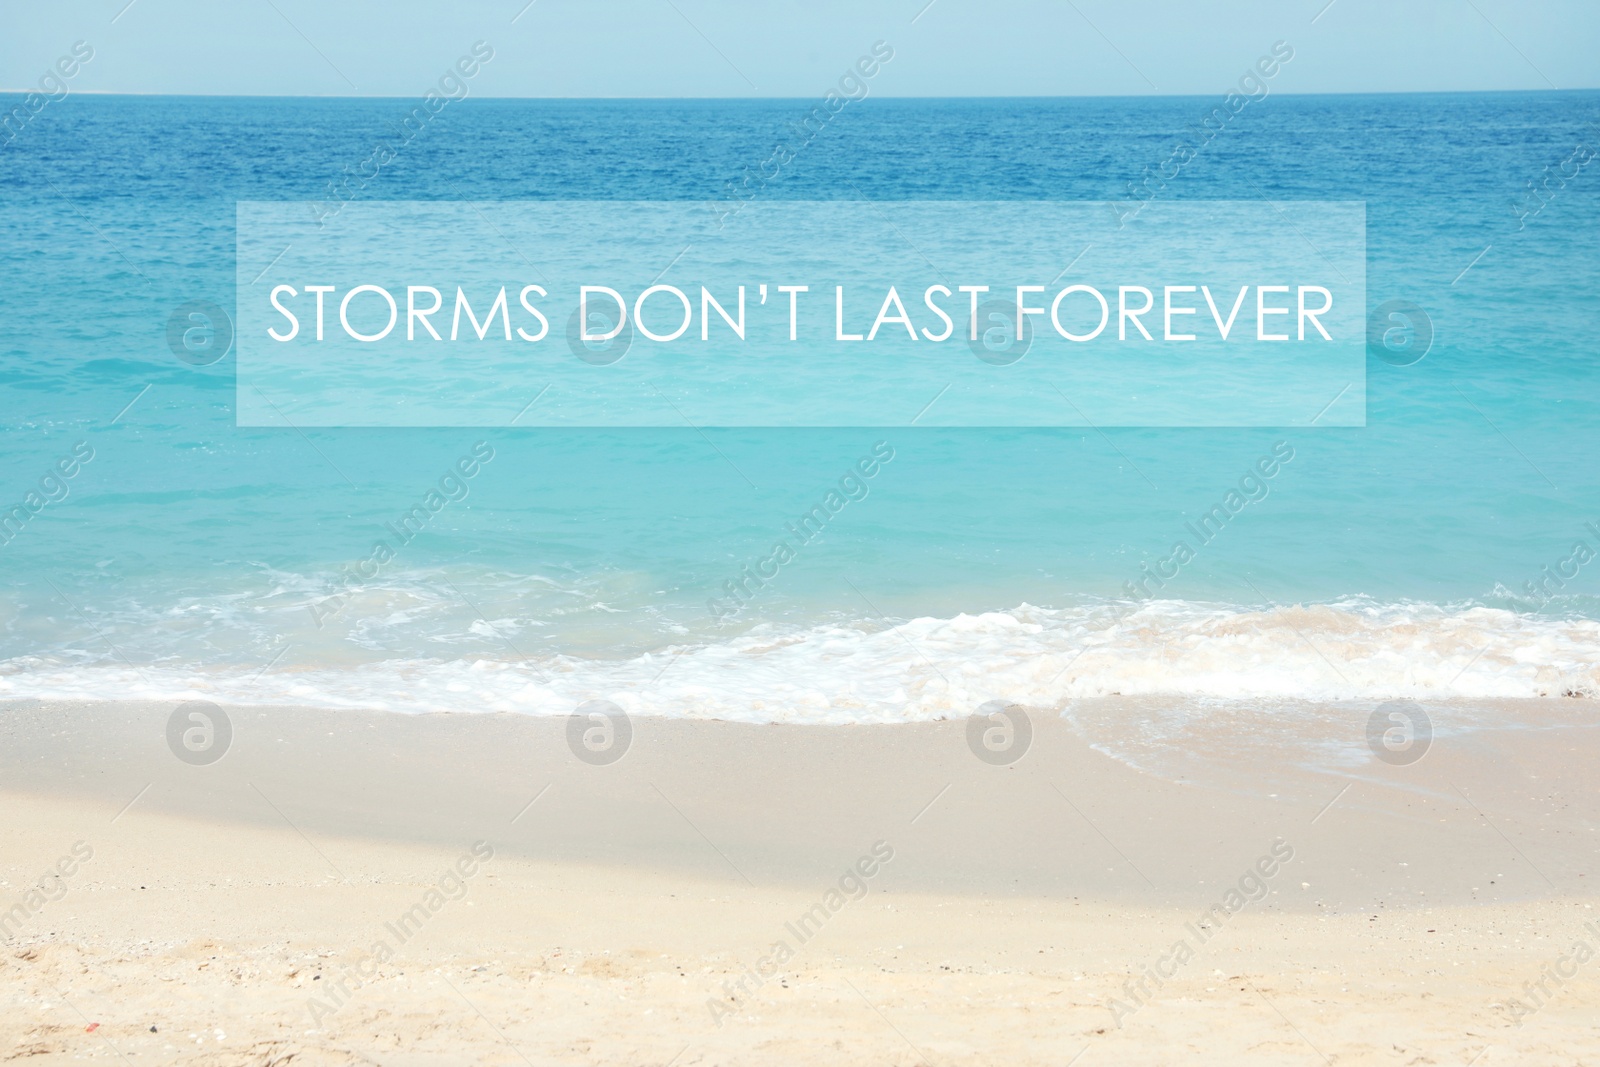 Image of Storms Don't Last Forever. Inspirational quote motivating to believe in future, to remember that bad times aren't permanent, they will change. Text against beautiful beach and ocean 